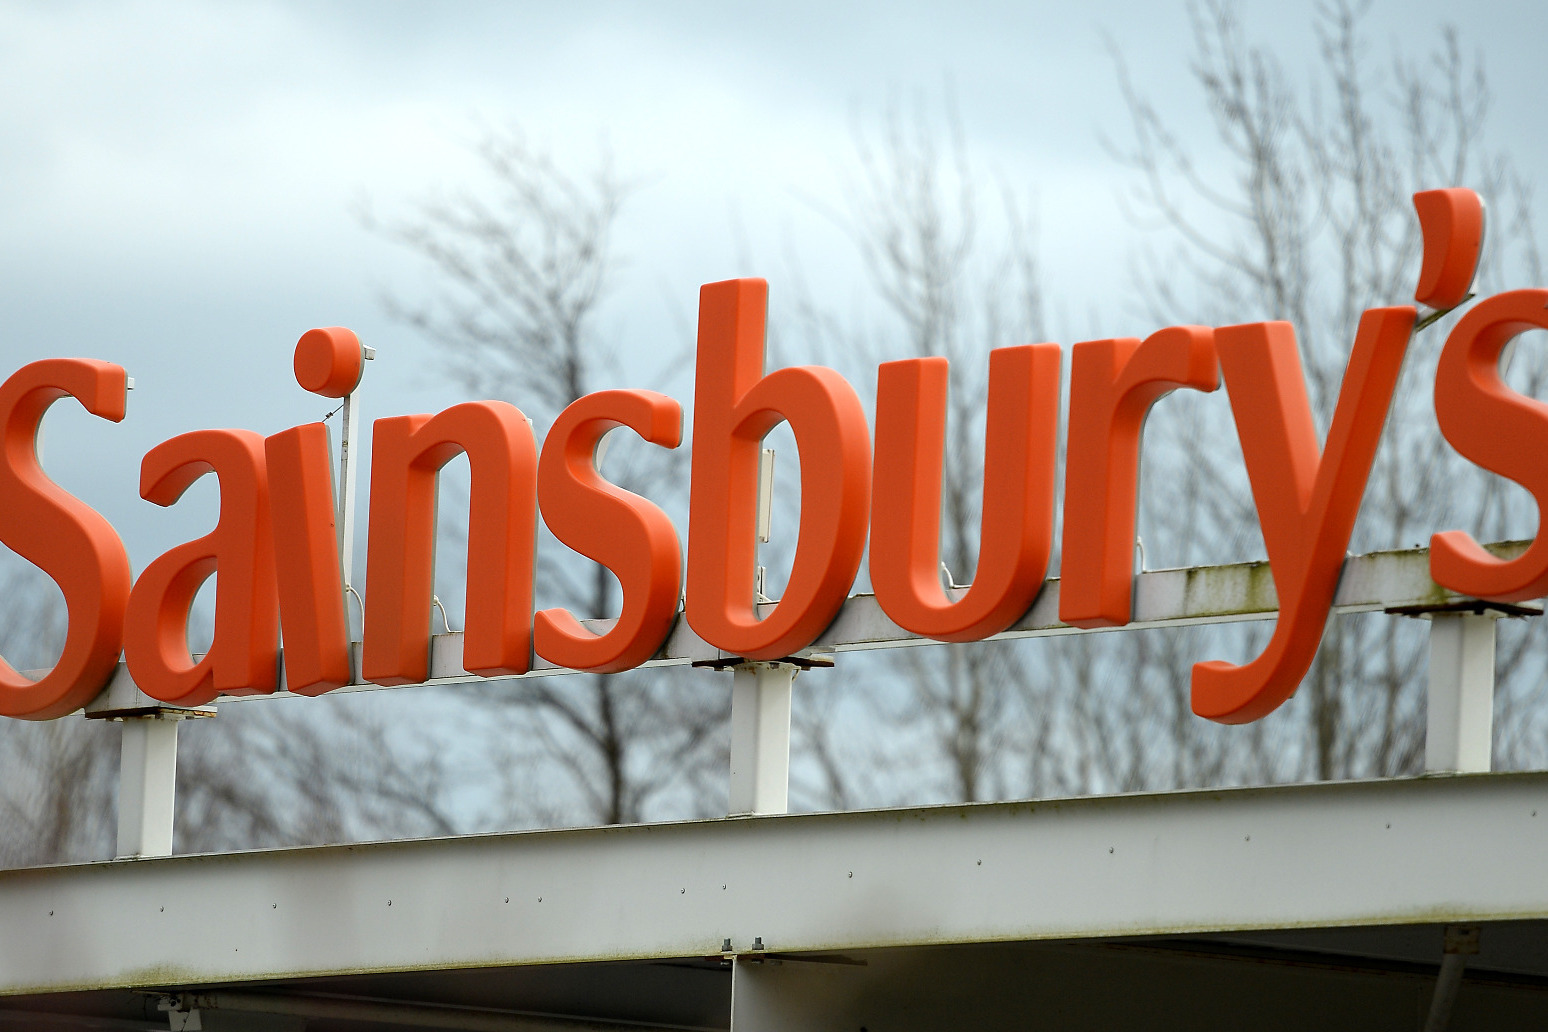 Sainsbury’s seals £431m deal to buy freeholds of 21 stores 